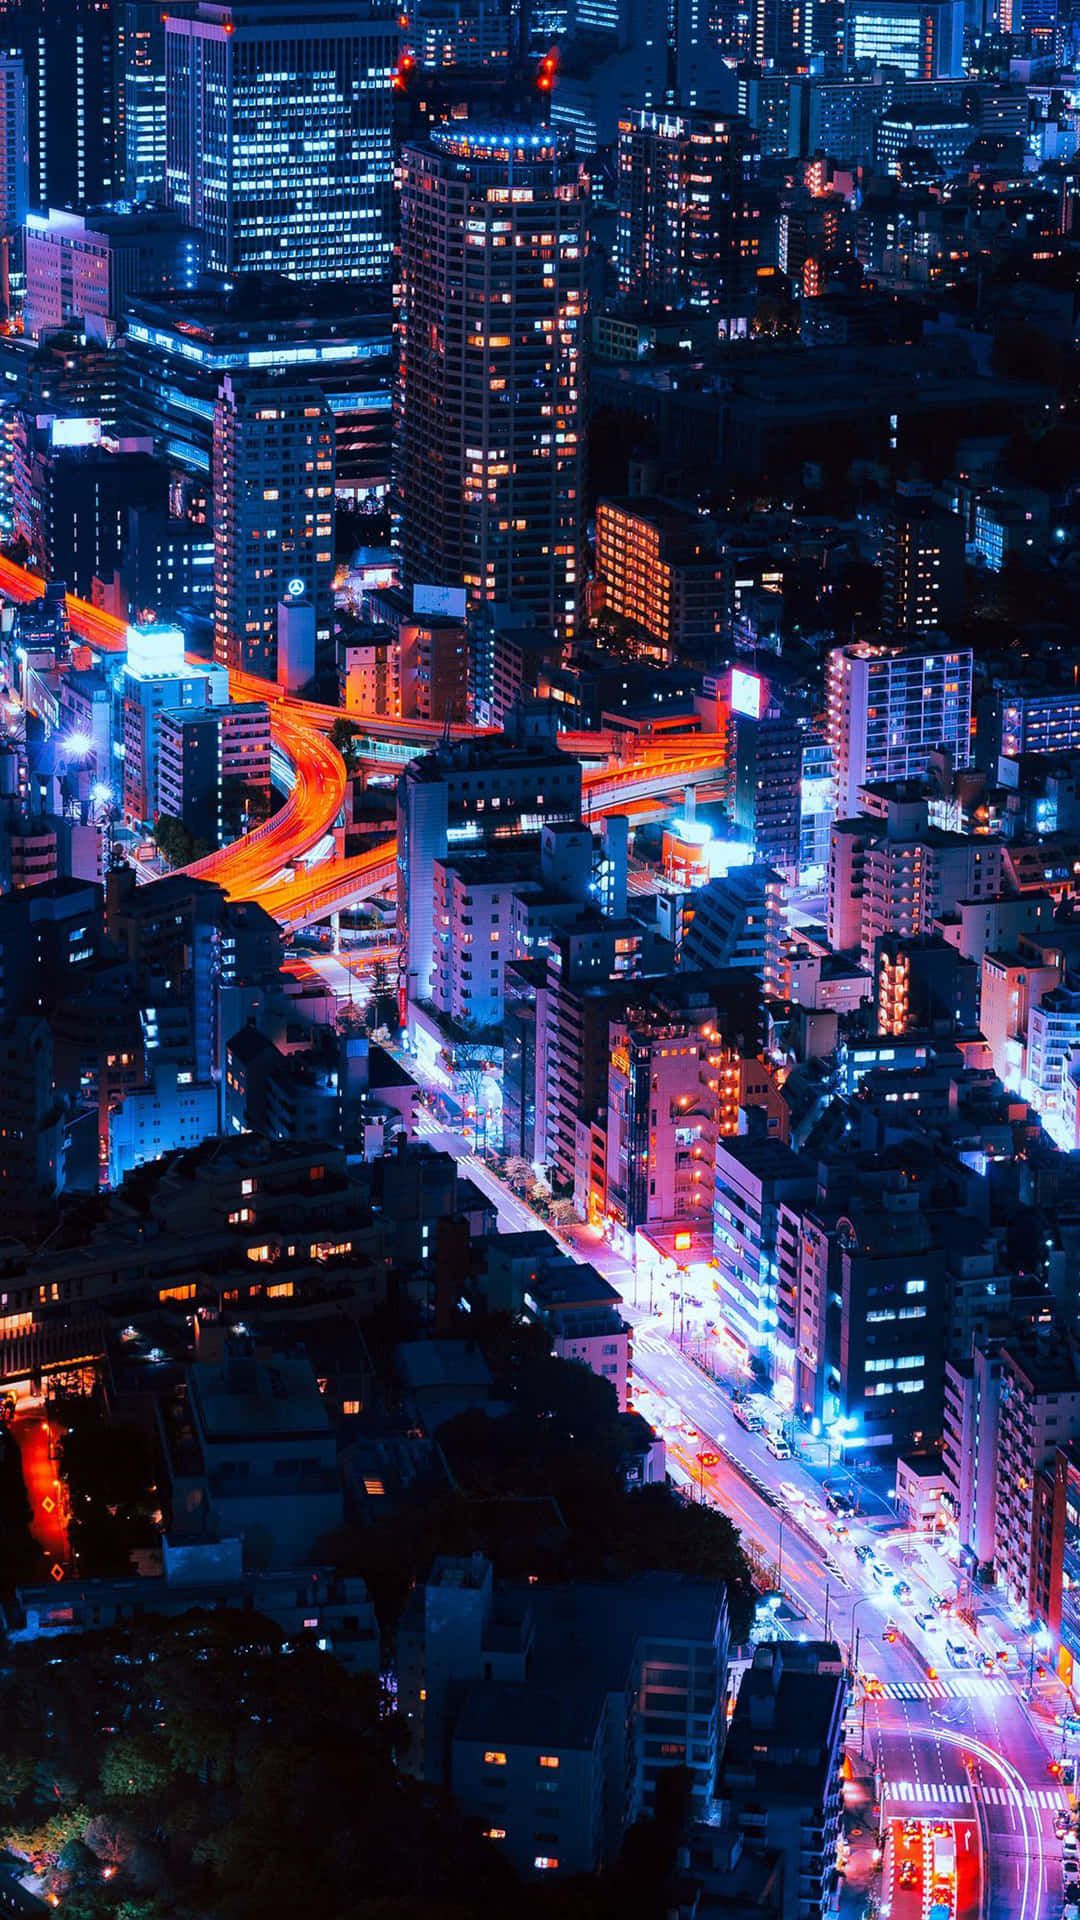 A city at night with many lights - Japan